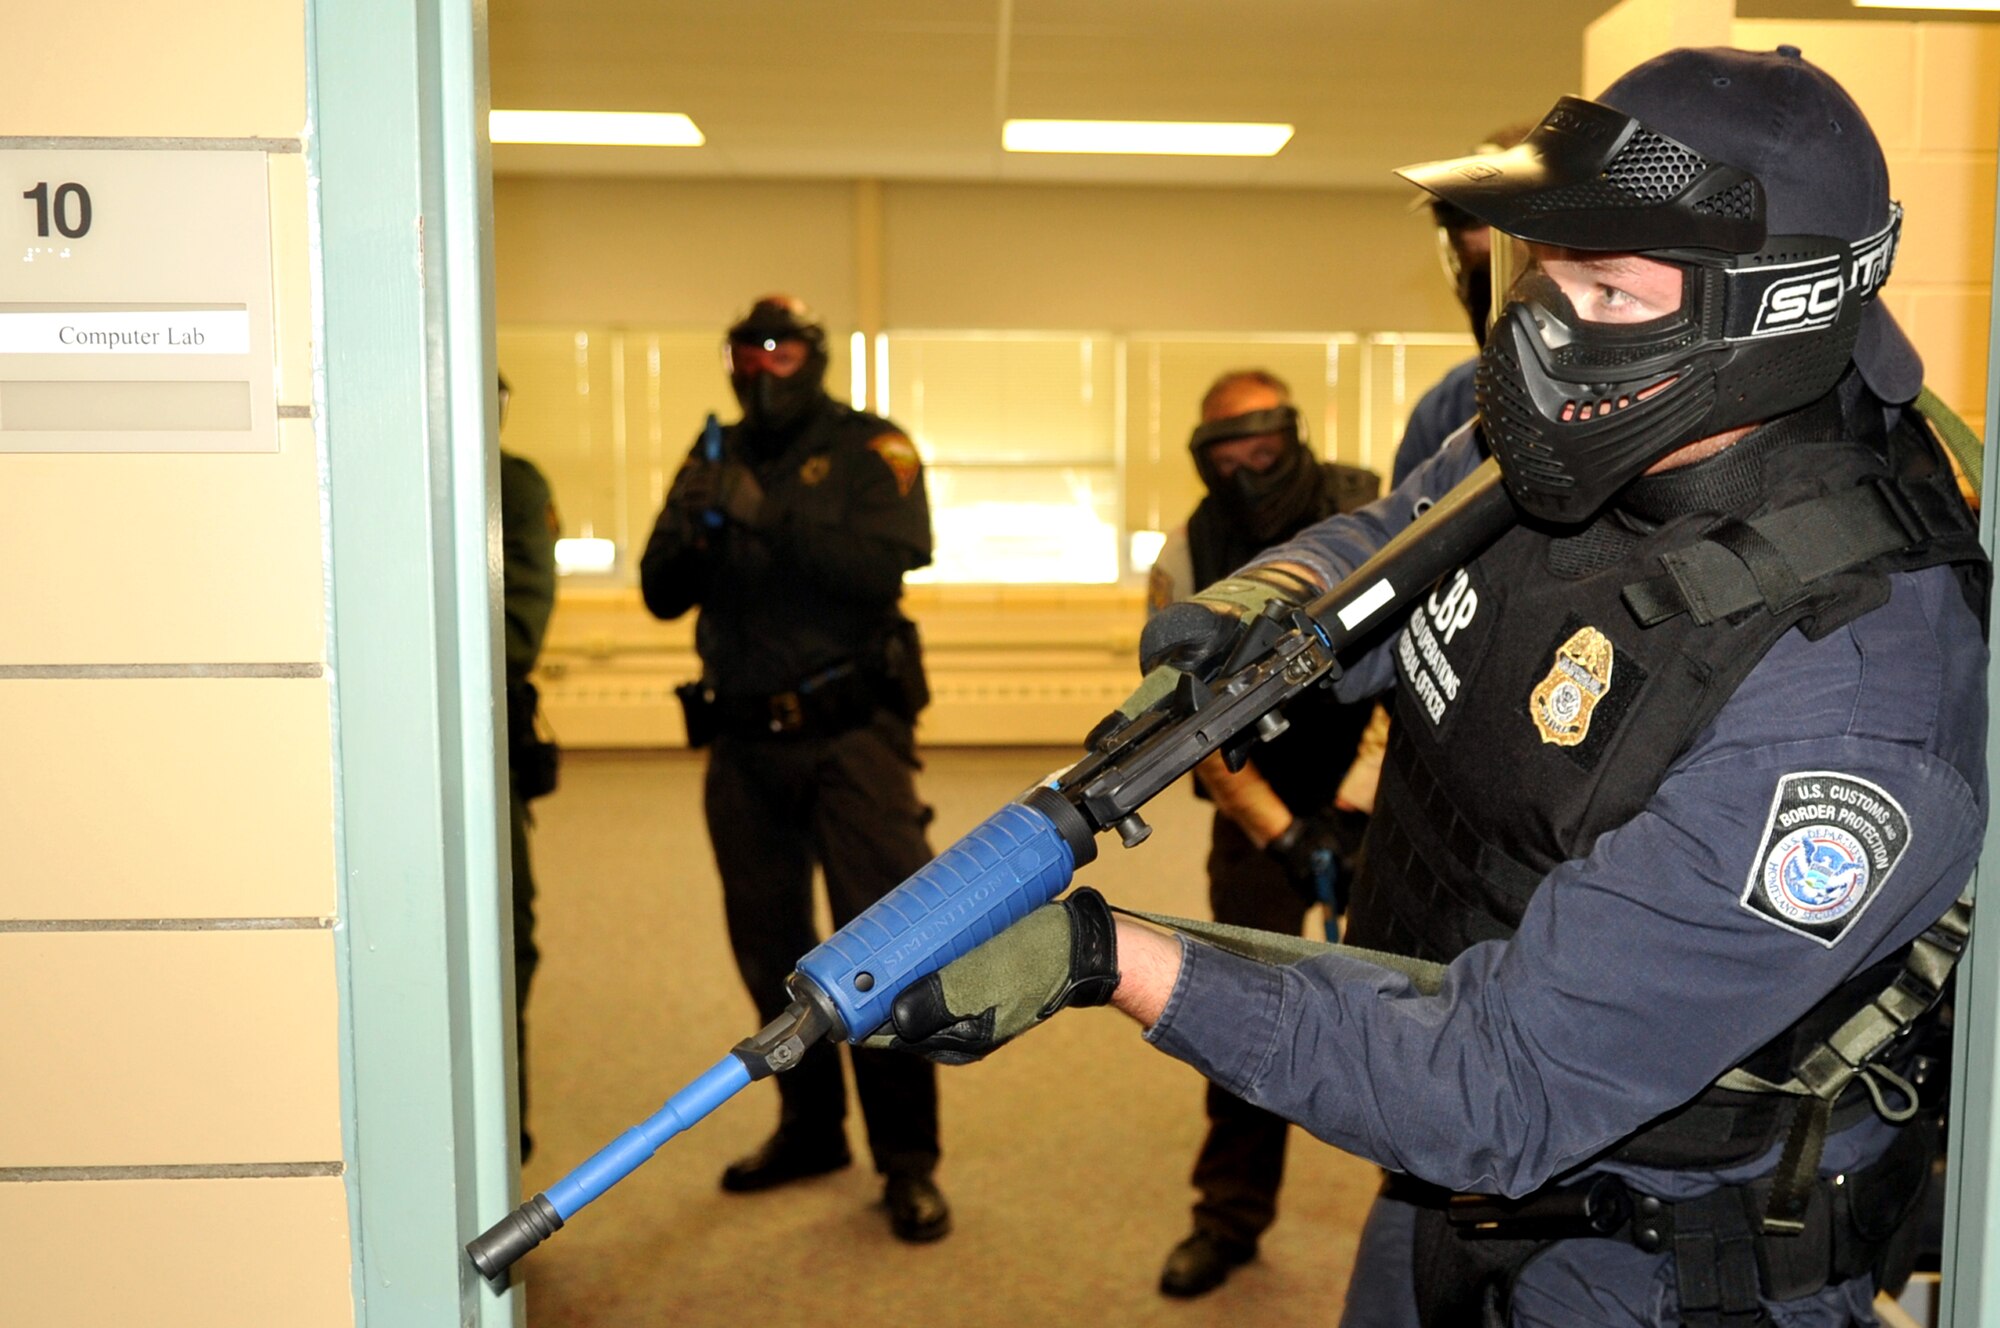 A U.S. Customs and Border Protection officer performs rear security as other police officers practice room clearing procedures during a training scenario Sept. 3, 2015 at Carl Ben Eielson Elementary School on Grand Forks Air Force Base, North Dakota. Nearly two dozen law enforcement officers from various agencies across the region came together here during the first week of September 2015 for some classroom and hands-on training dealing with a variety of active shooter scenarios. (U.S. Air Force photo/Staff Sgt. Susan L. Davis)